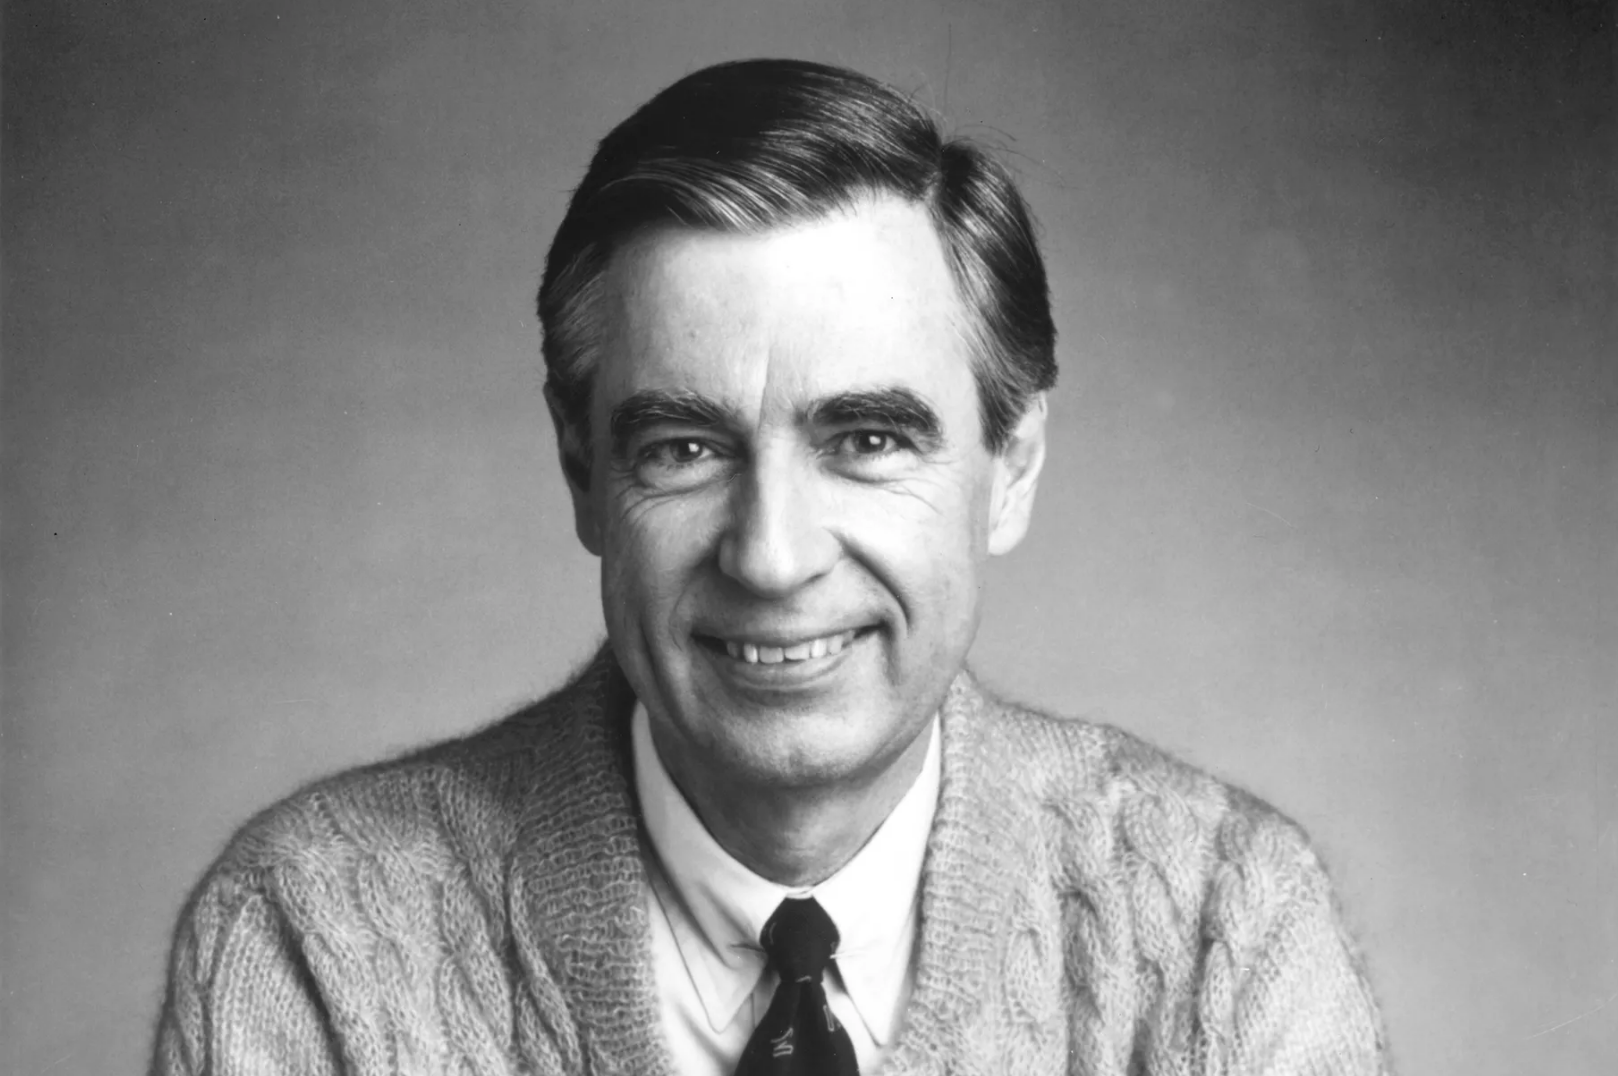 An Exercise from Mister Rogers